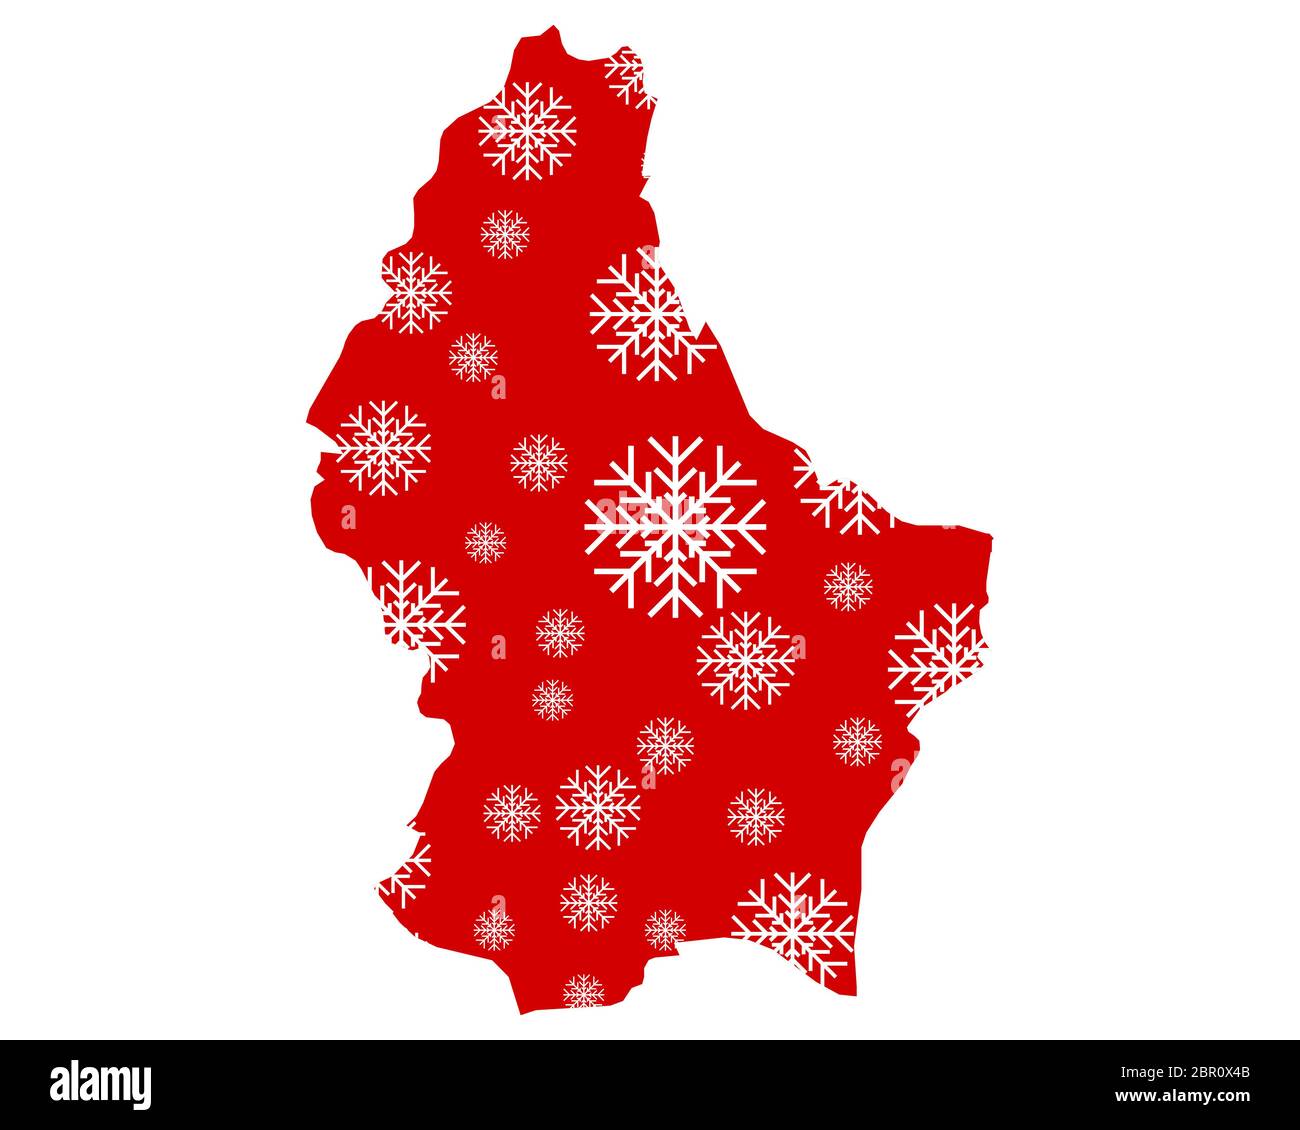 Map of Luxembourg with snowflakes Stock Photo